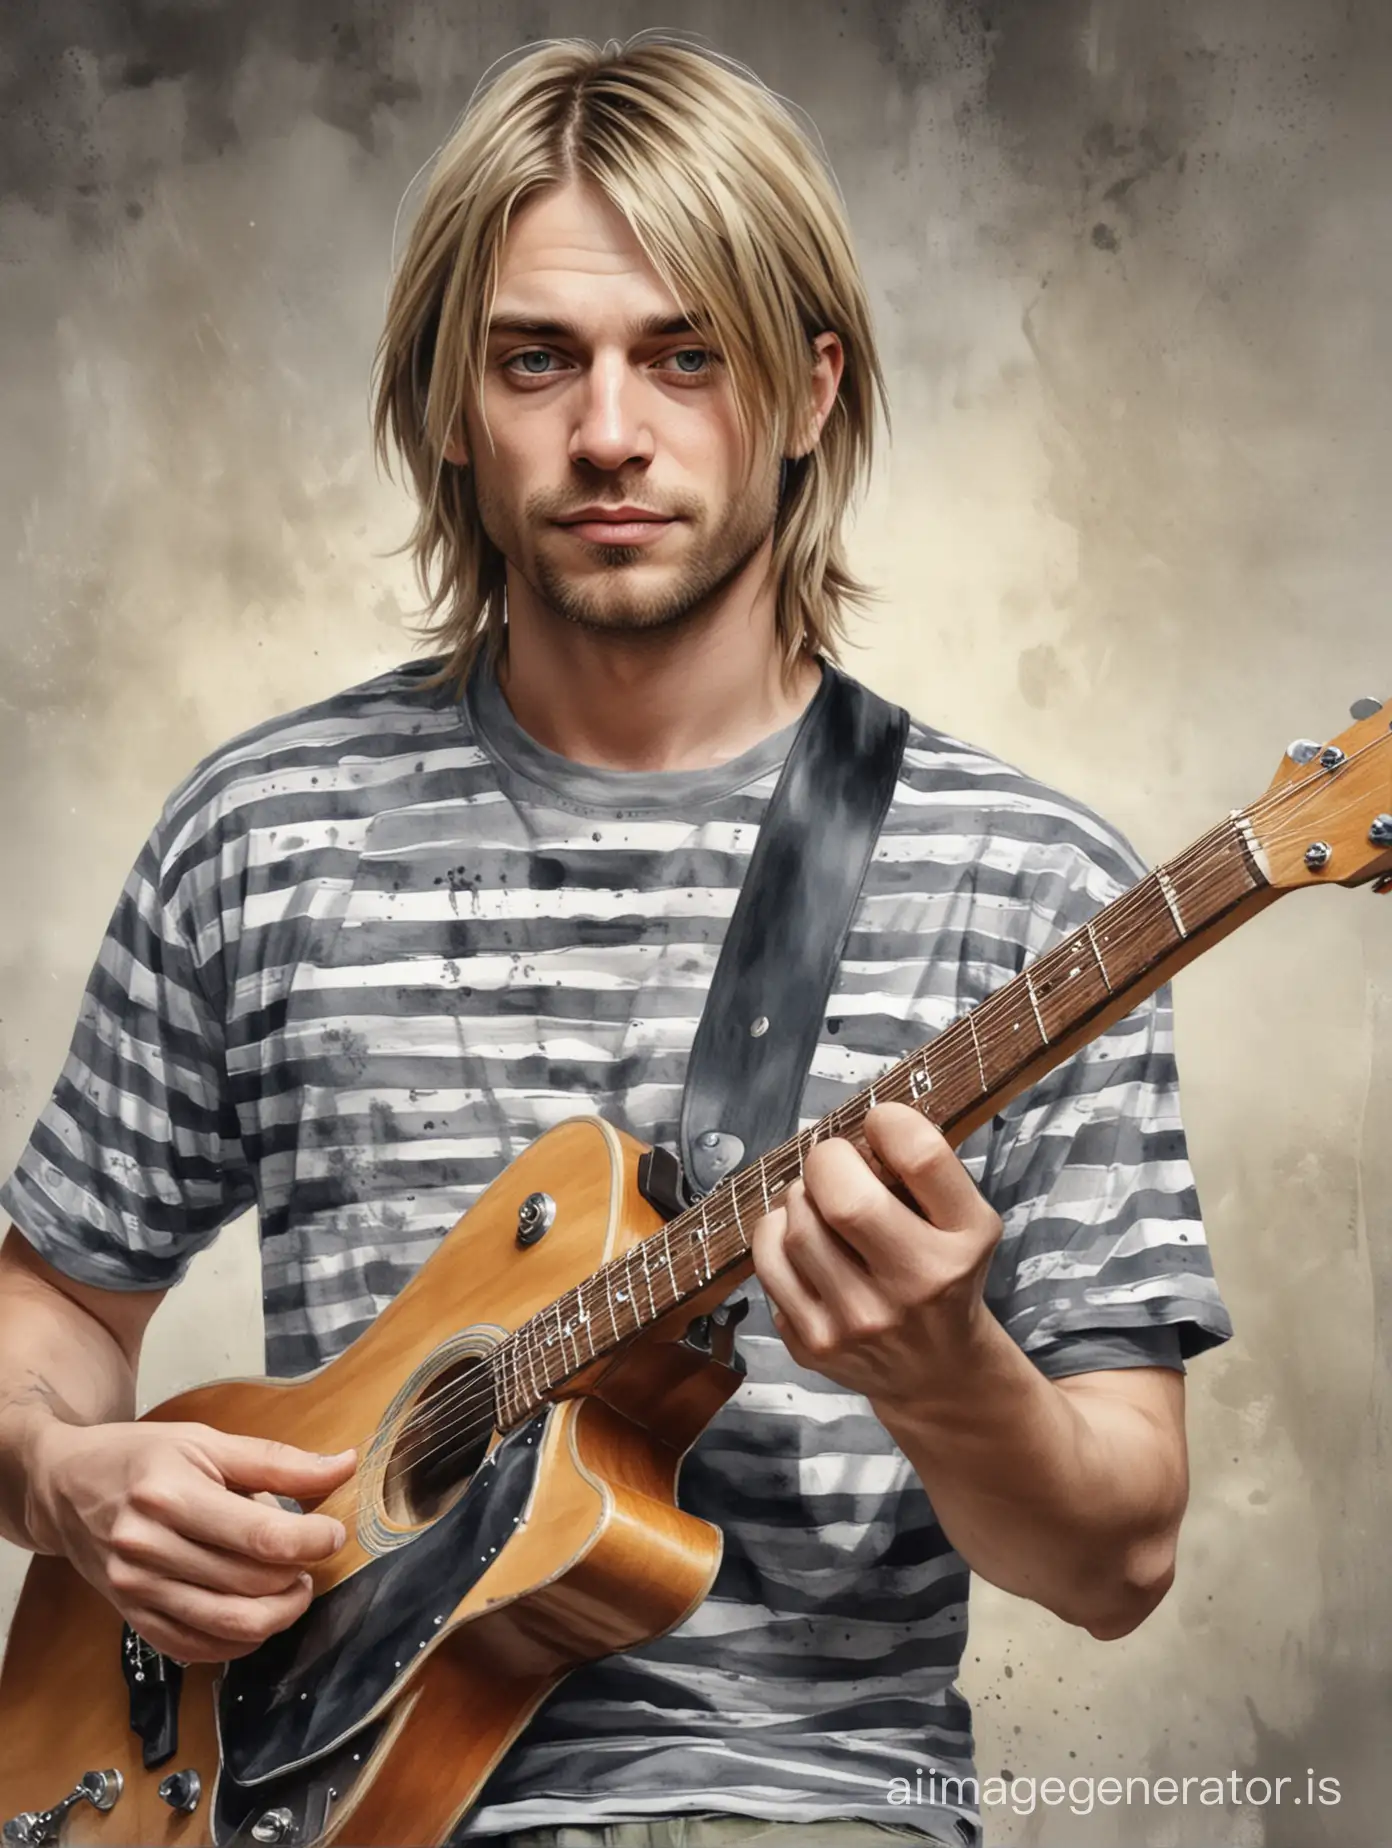 Realistic image, watercolor painting, produces a american man, named Cobain, wearing a stripped gray t-shirt, playing the guitar seen from the front, detailed image, detailed visuals, looks real, HD